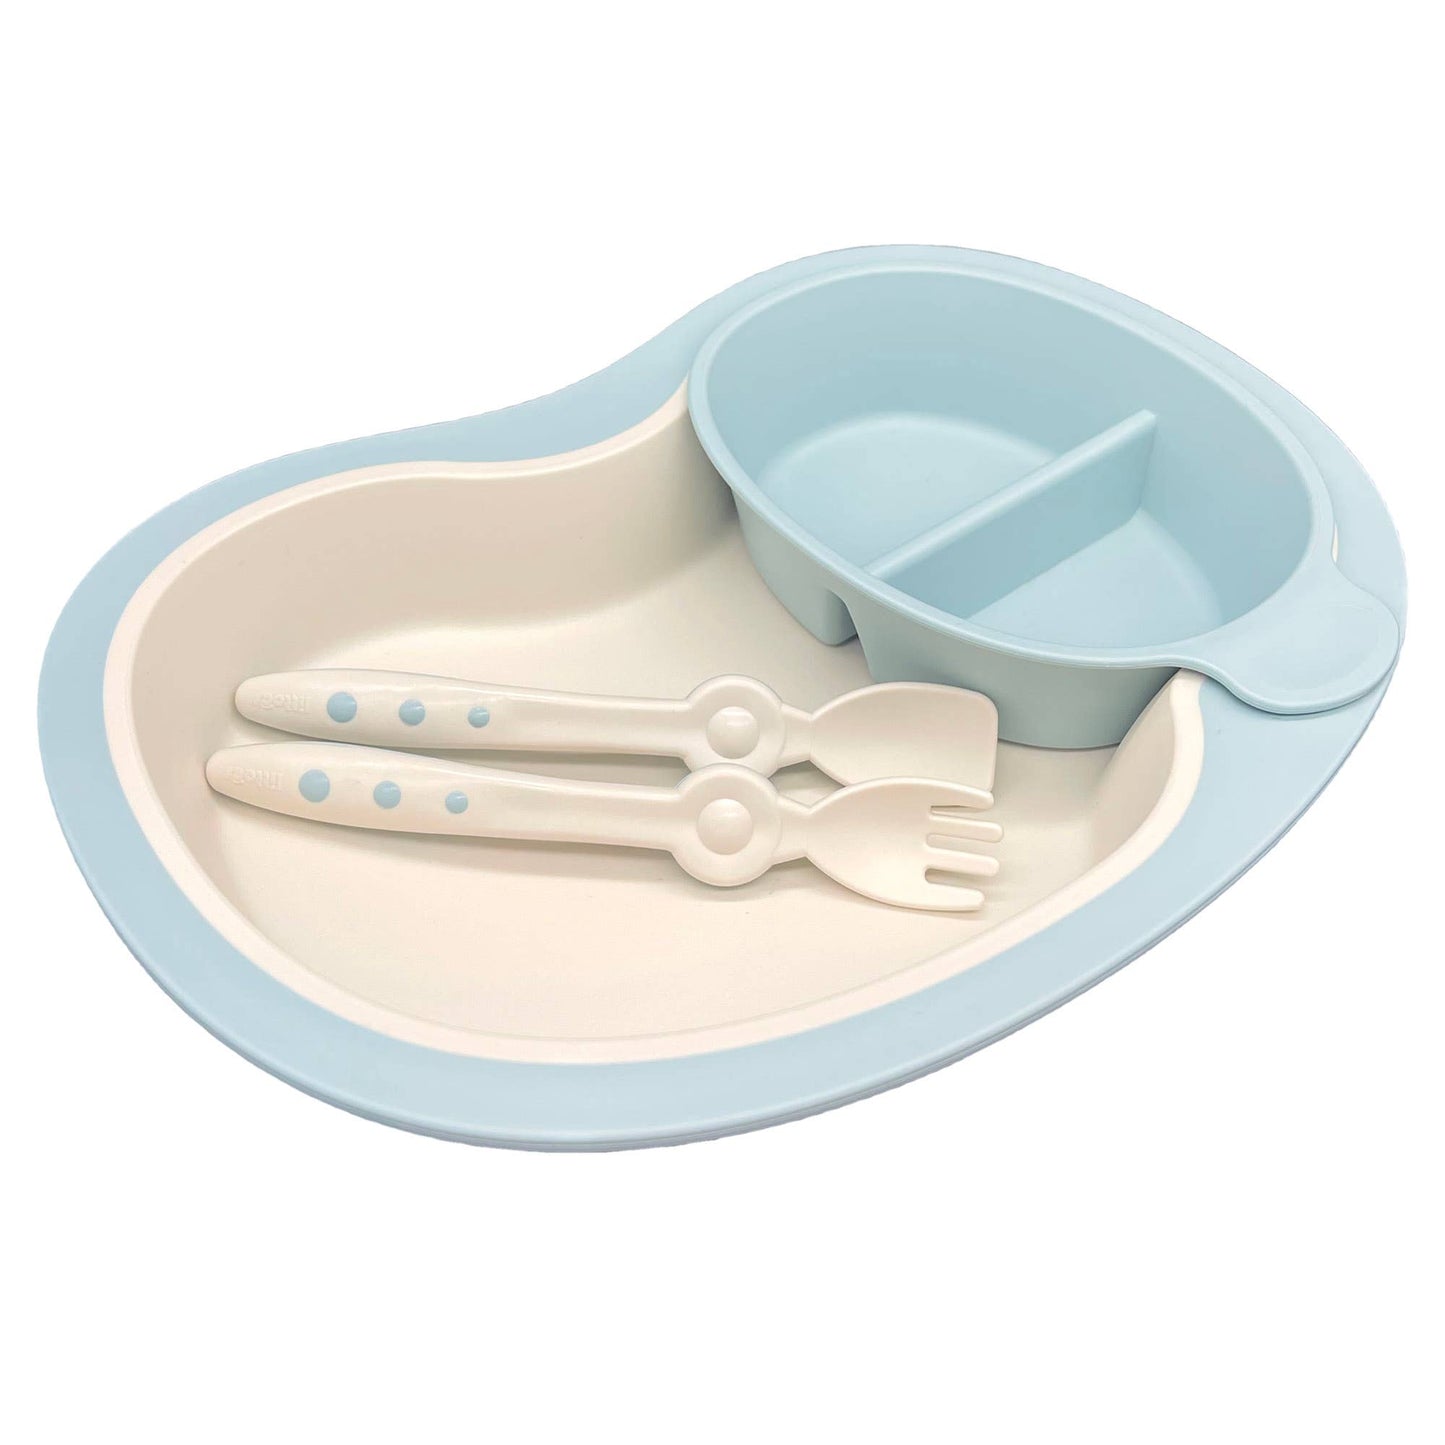 LITTOES Wide Plate with Removable Bowl - Tidy Dinnerware Set for Baby Weaning